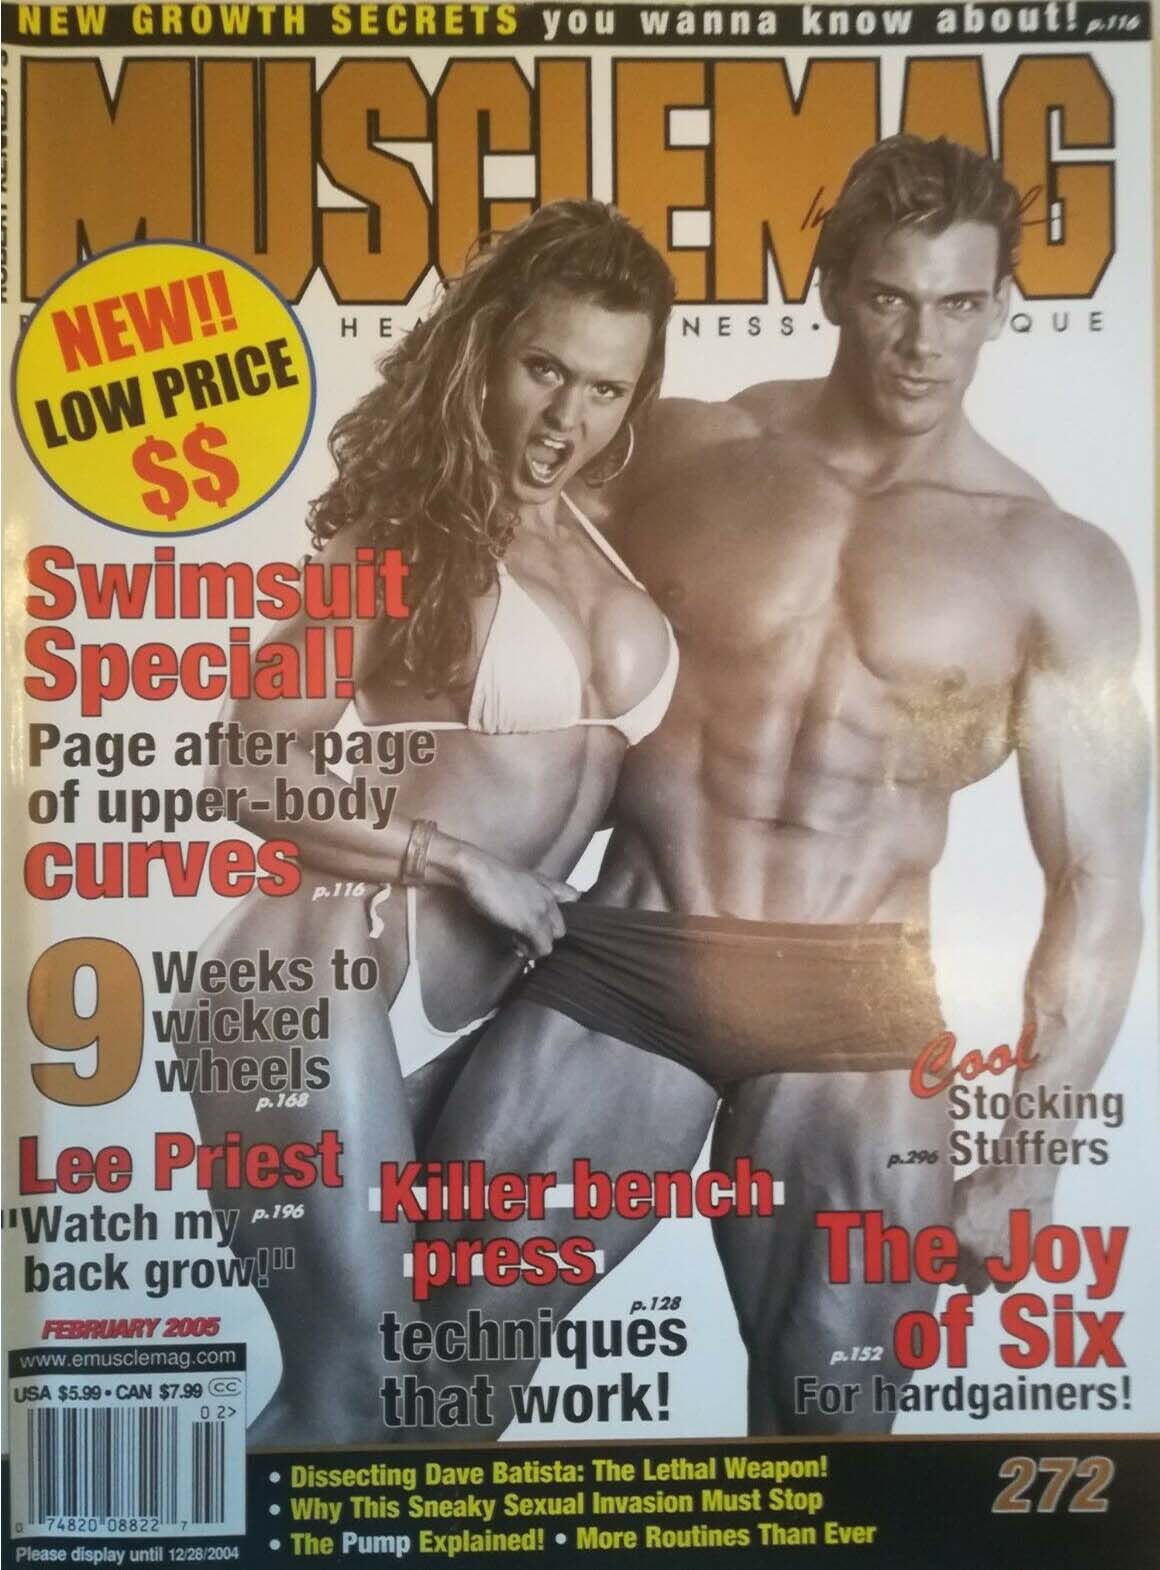 Muscle Mag February 2005 magazine back issue Muscle Mag magizine back copy Muscle Mag February 2005 Bodybuilding and Fitness Magazine Back Issue Published by Canadian Robert Kennedy and Founded in 1974. New Growth Secrets You Wanna Know About!.